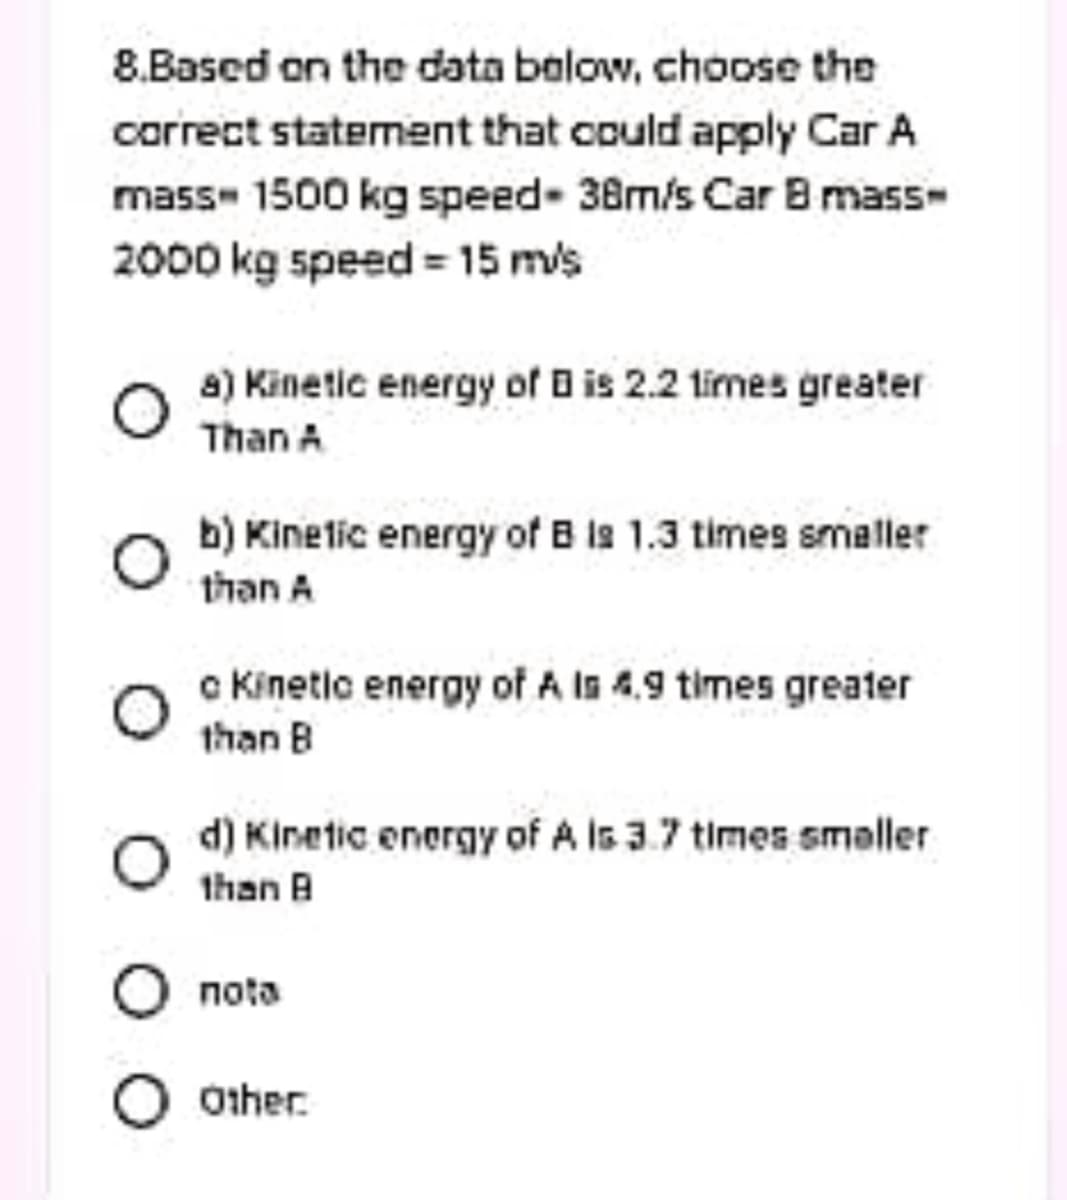 8.Based on the data balow, choose the
carrect statement that could apply Car A
mass- 1500 kg speed- 38m/s Car B mass-
2000 kg speed = 15 m/s
a) Kinetic energy of B is 2.2 limes greater
Than A
b) Kinelic energy of B ls 1.3 times smaller
than A
c Kinetic energy of A Is 4.9 times greater
than B
d) Kinetic energy of A Is 3.7 times smaller
ם 1han
nota
O other.
